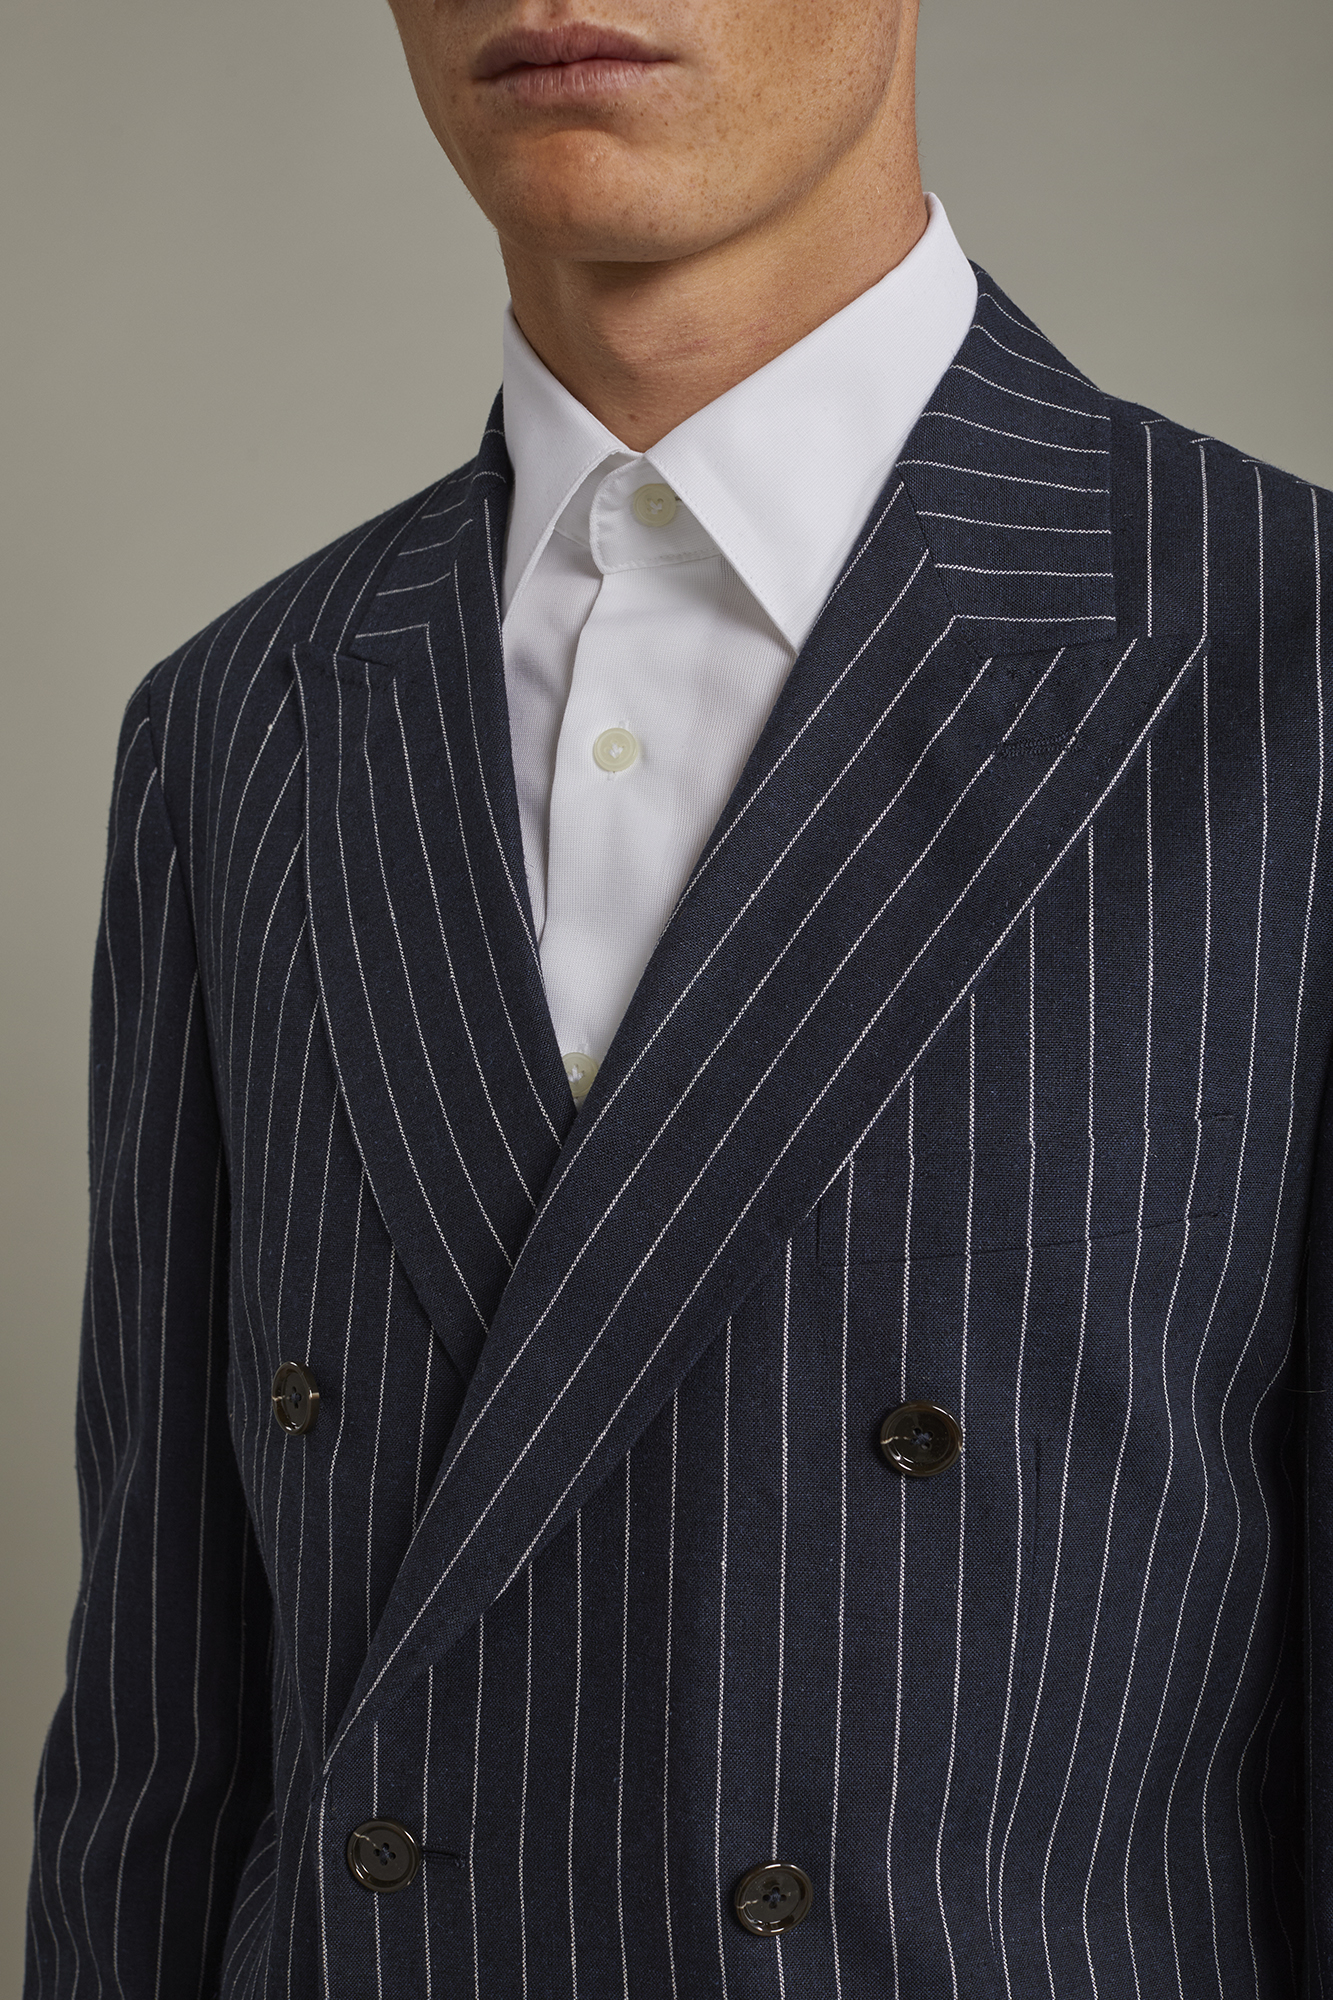 Men's unlined double-breasted blazer with spread collar and flap pockets linen and cotton fabric with regular fit pinstripe design image number null